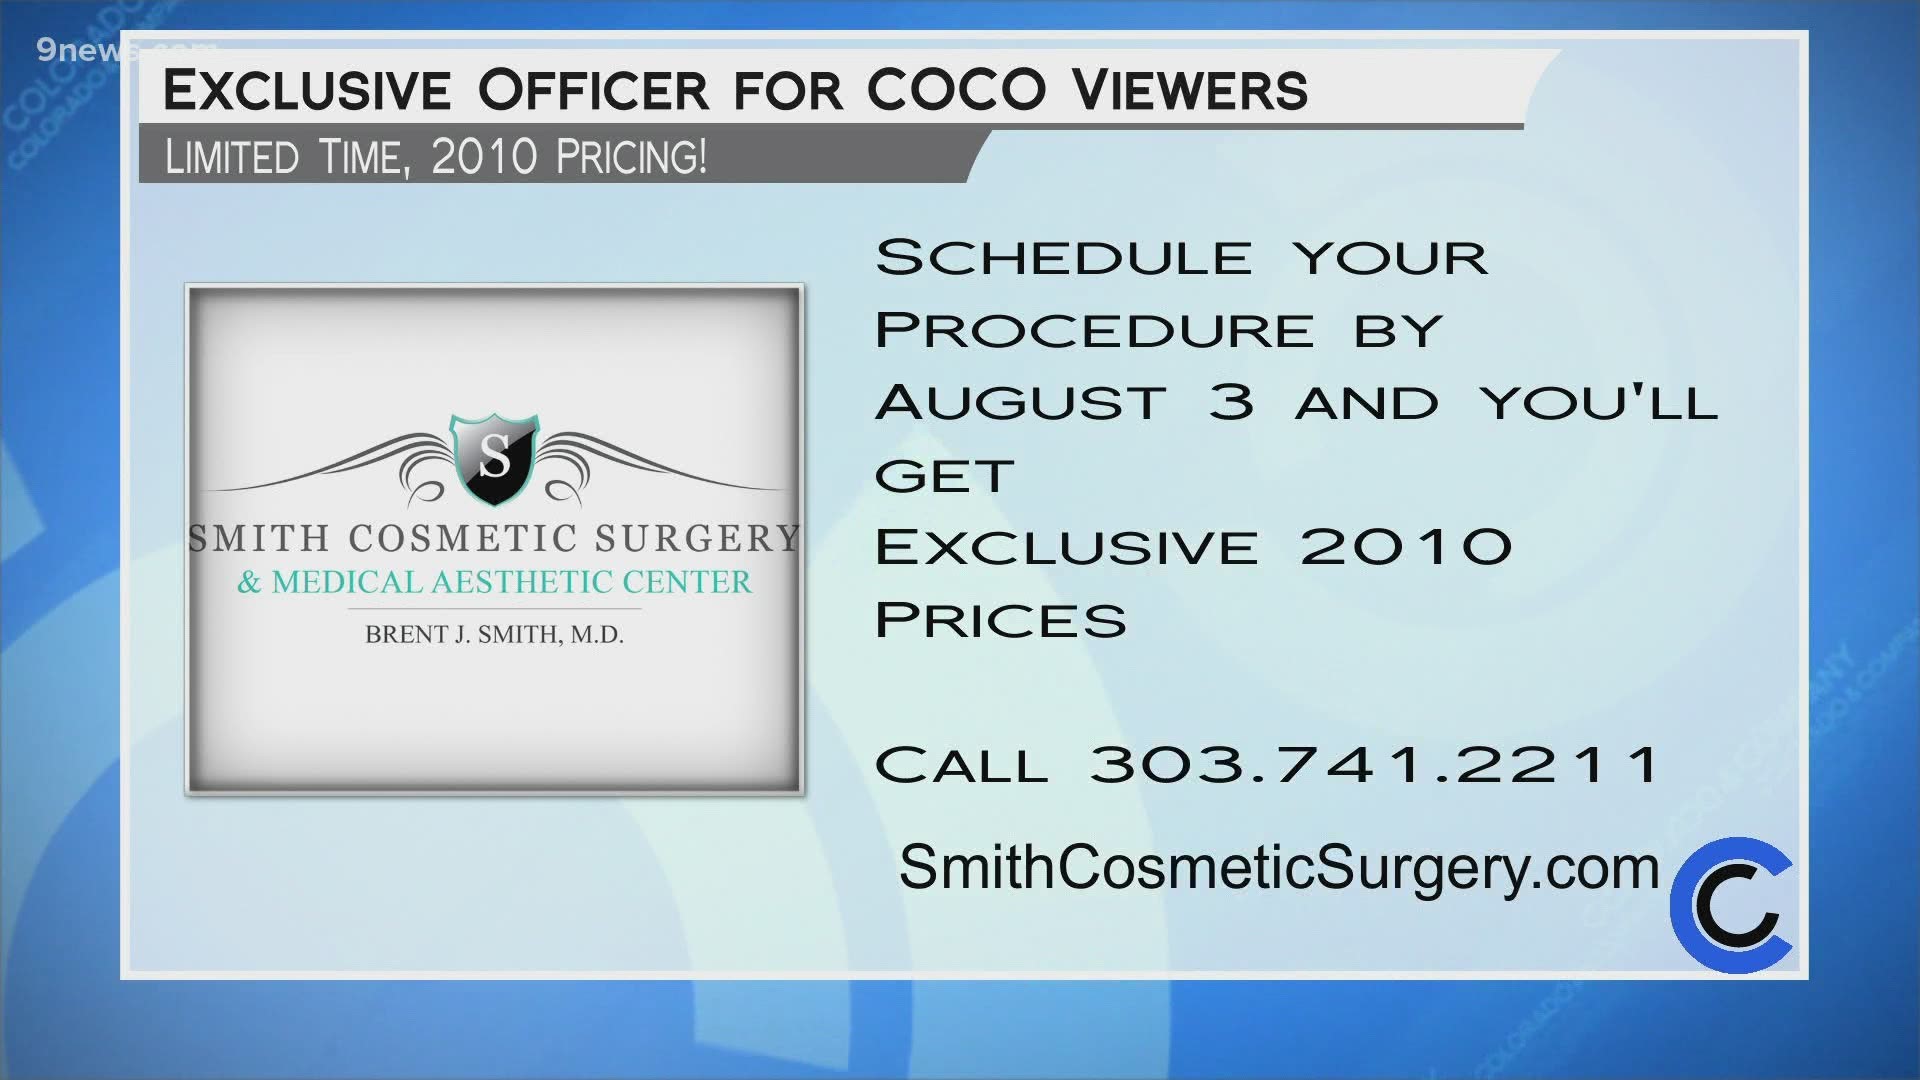 Book a procedure by August 3rd and you'll get surgical pricing from a decade ago! Save big and start today on SmithCosmeticSurgery.com or call 303.741.2211.